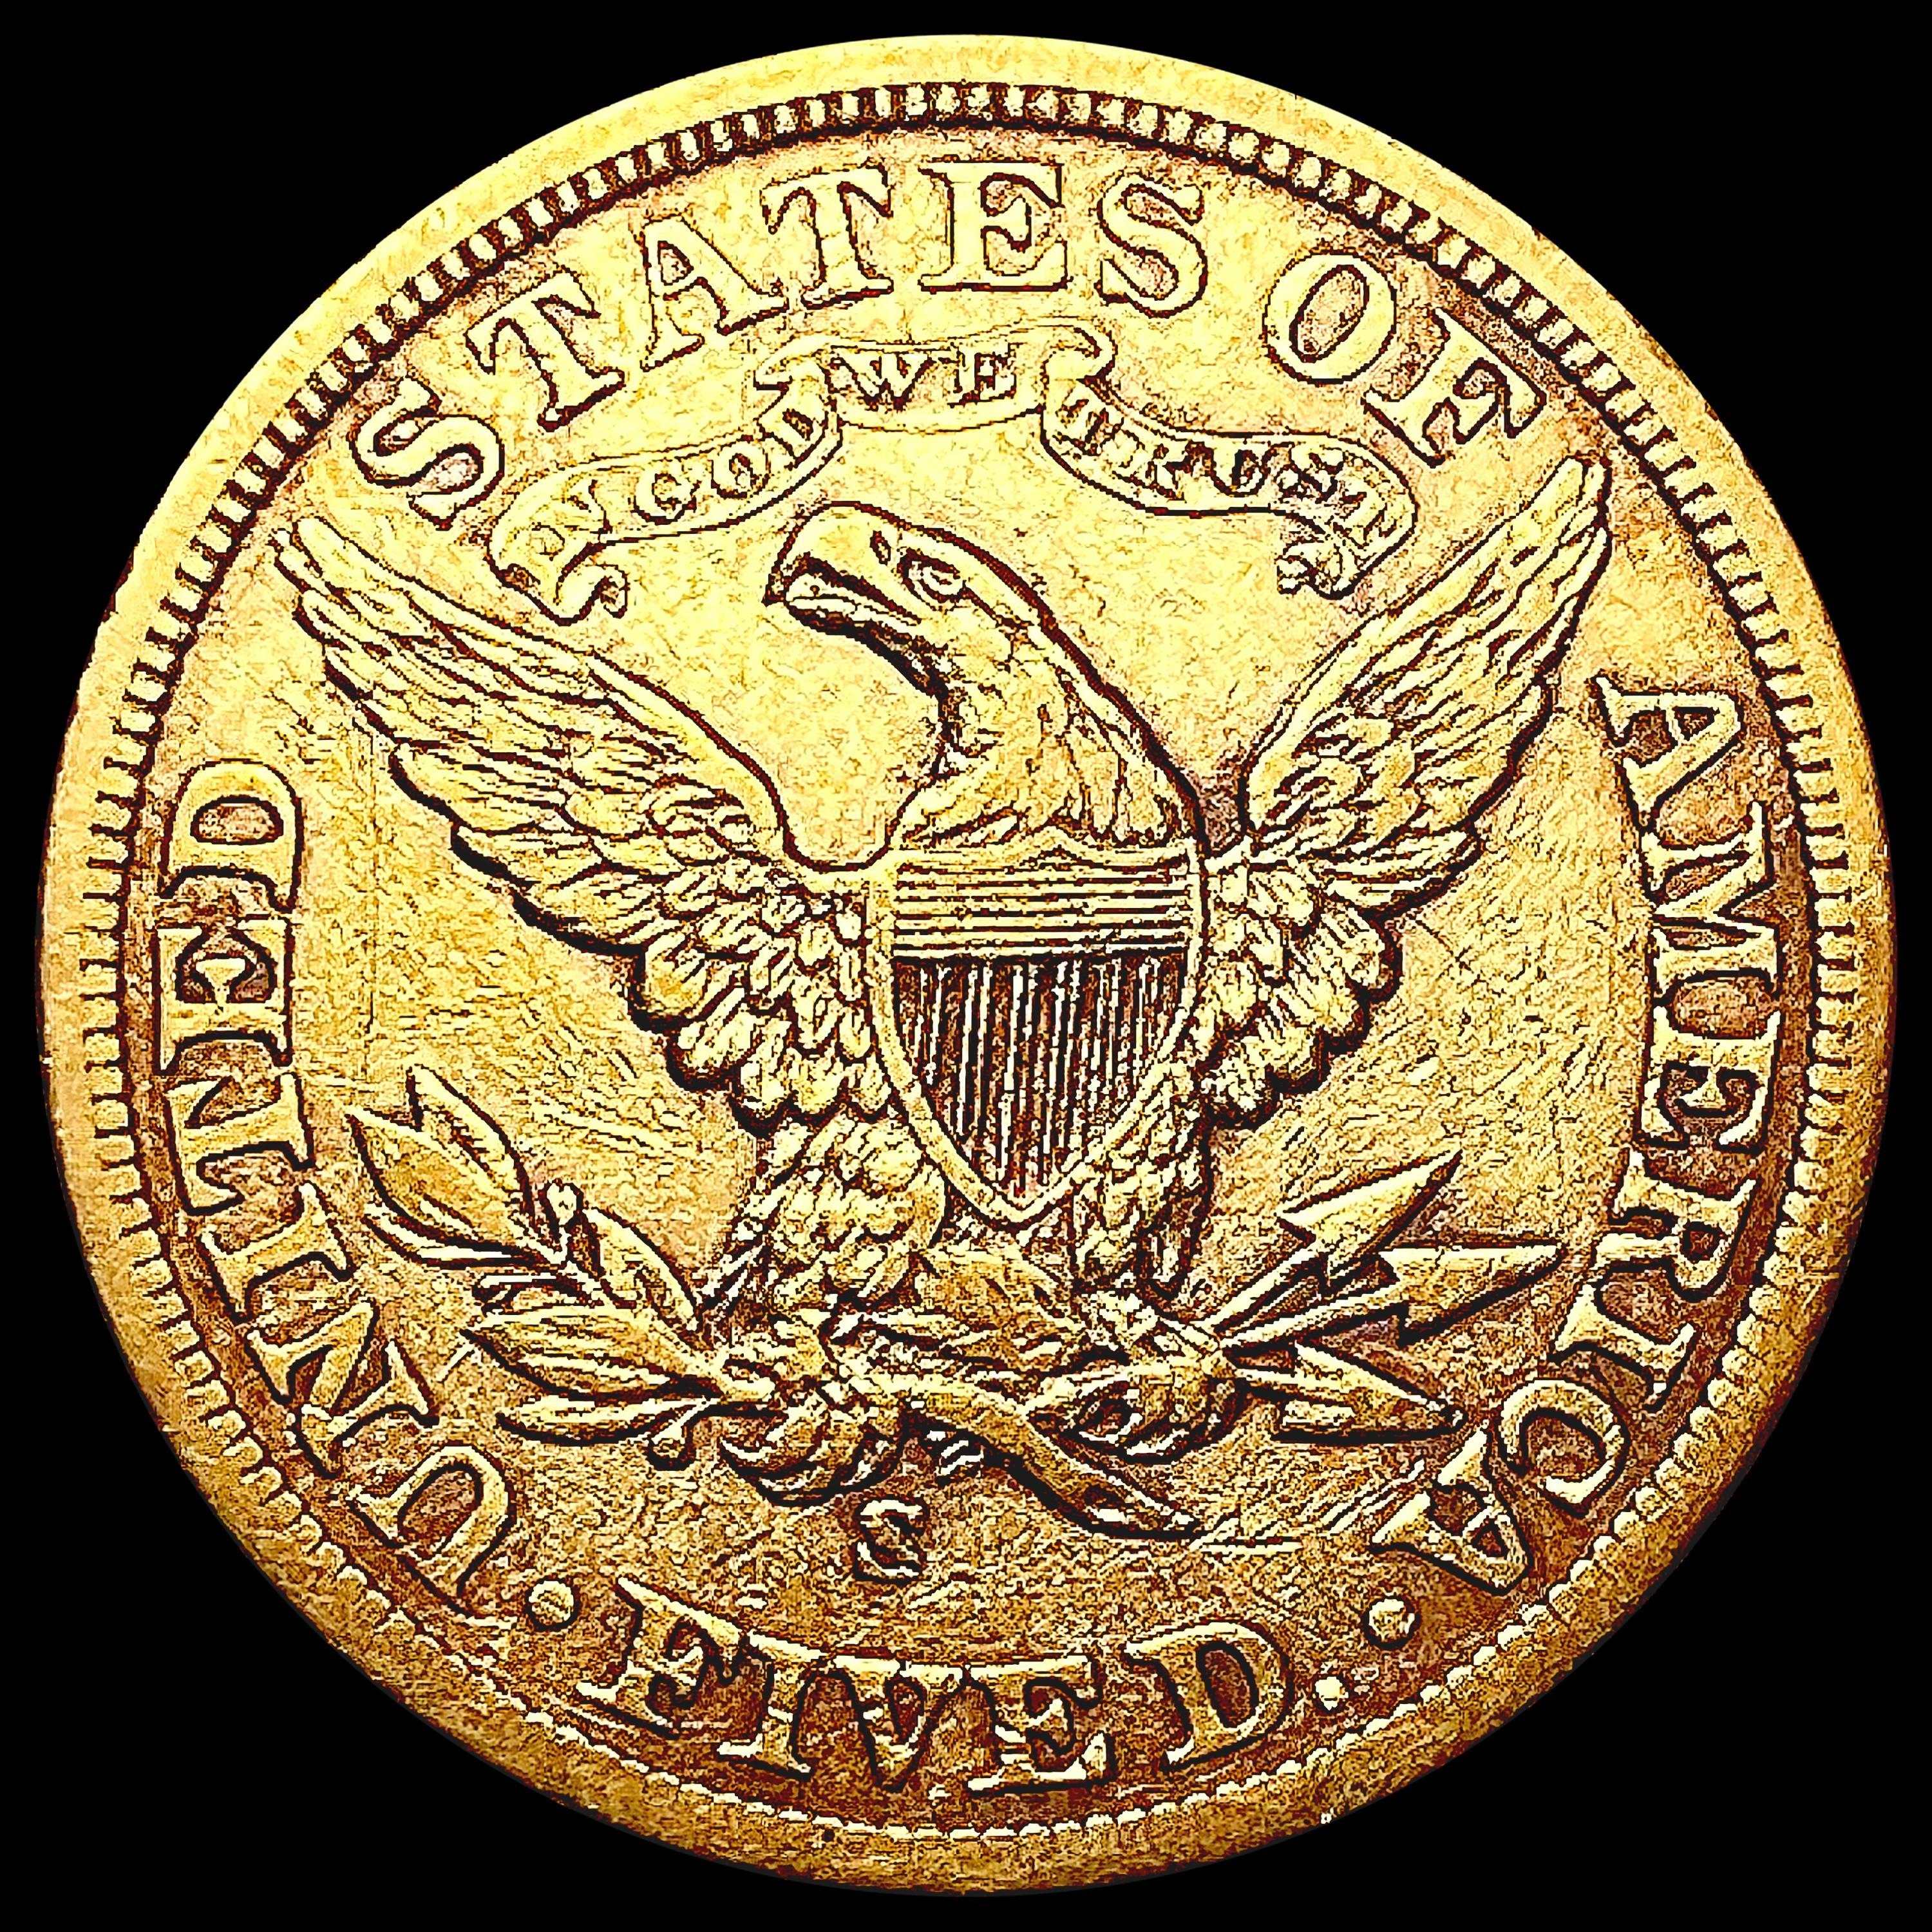 1901-S $5 Gold Half Eagle NEARLY UNCIRCULATED